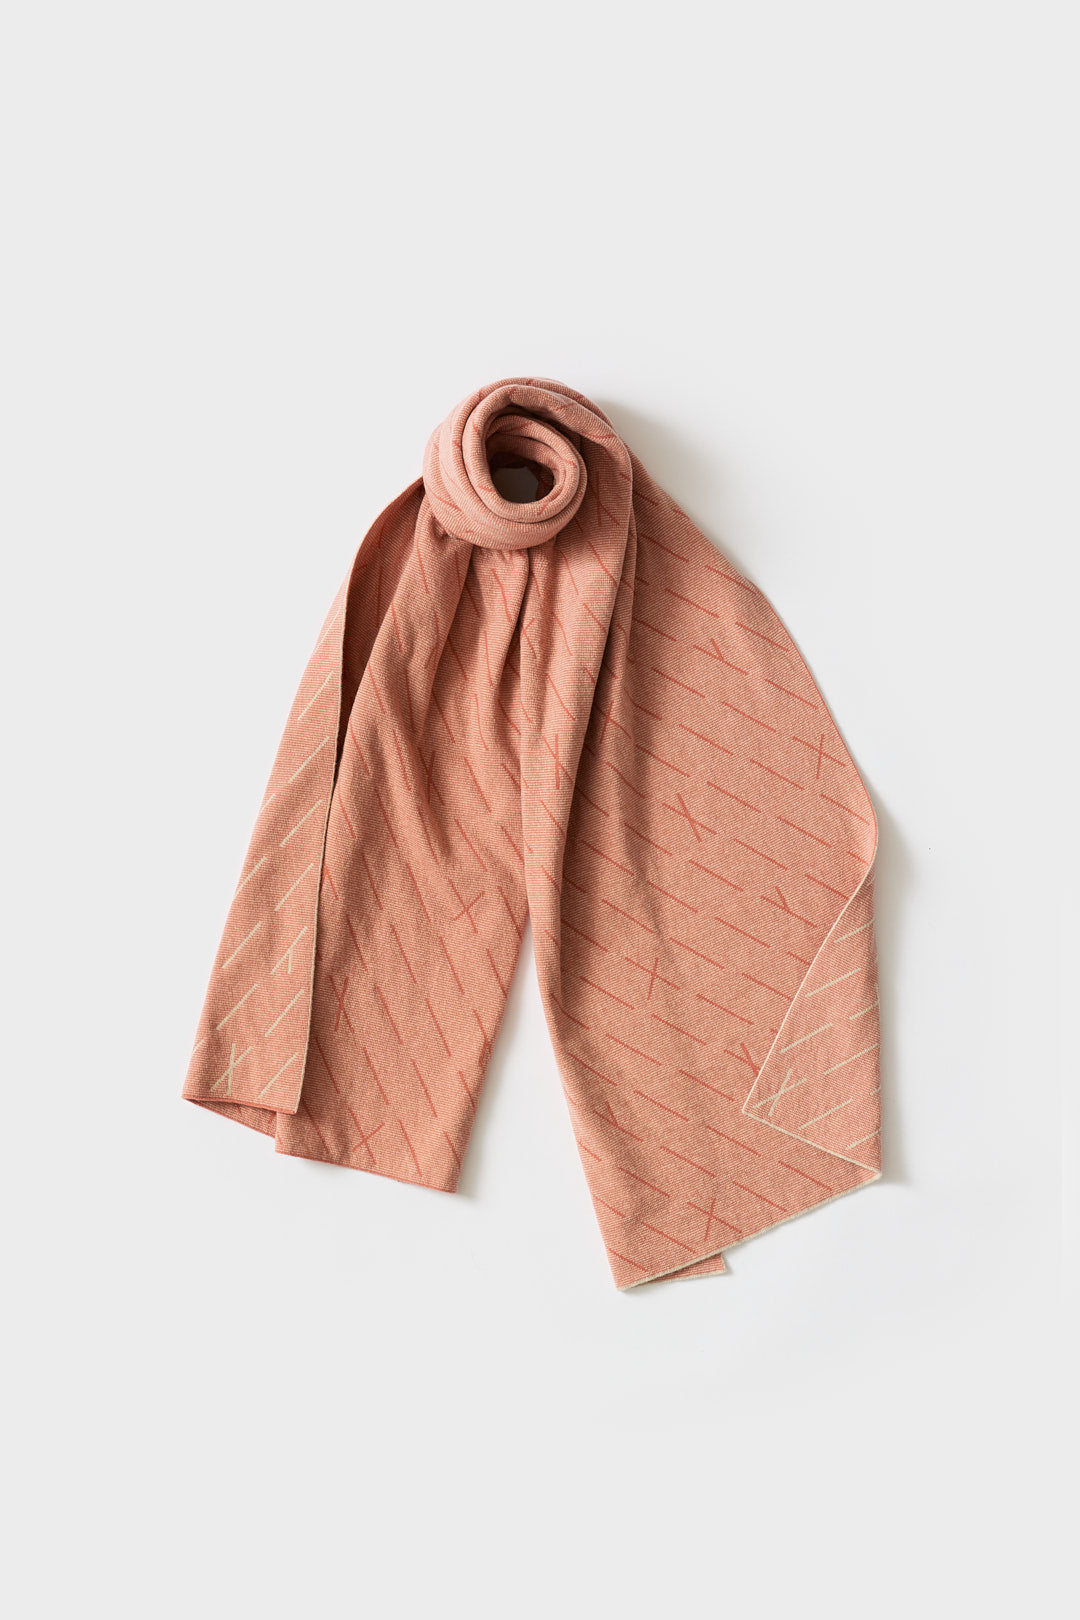 Scarf "Forest" - Rosehip & Oatmeal